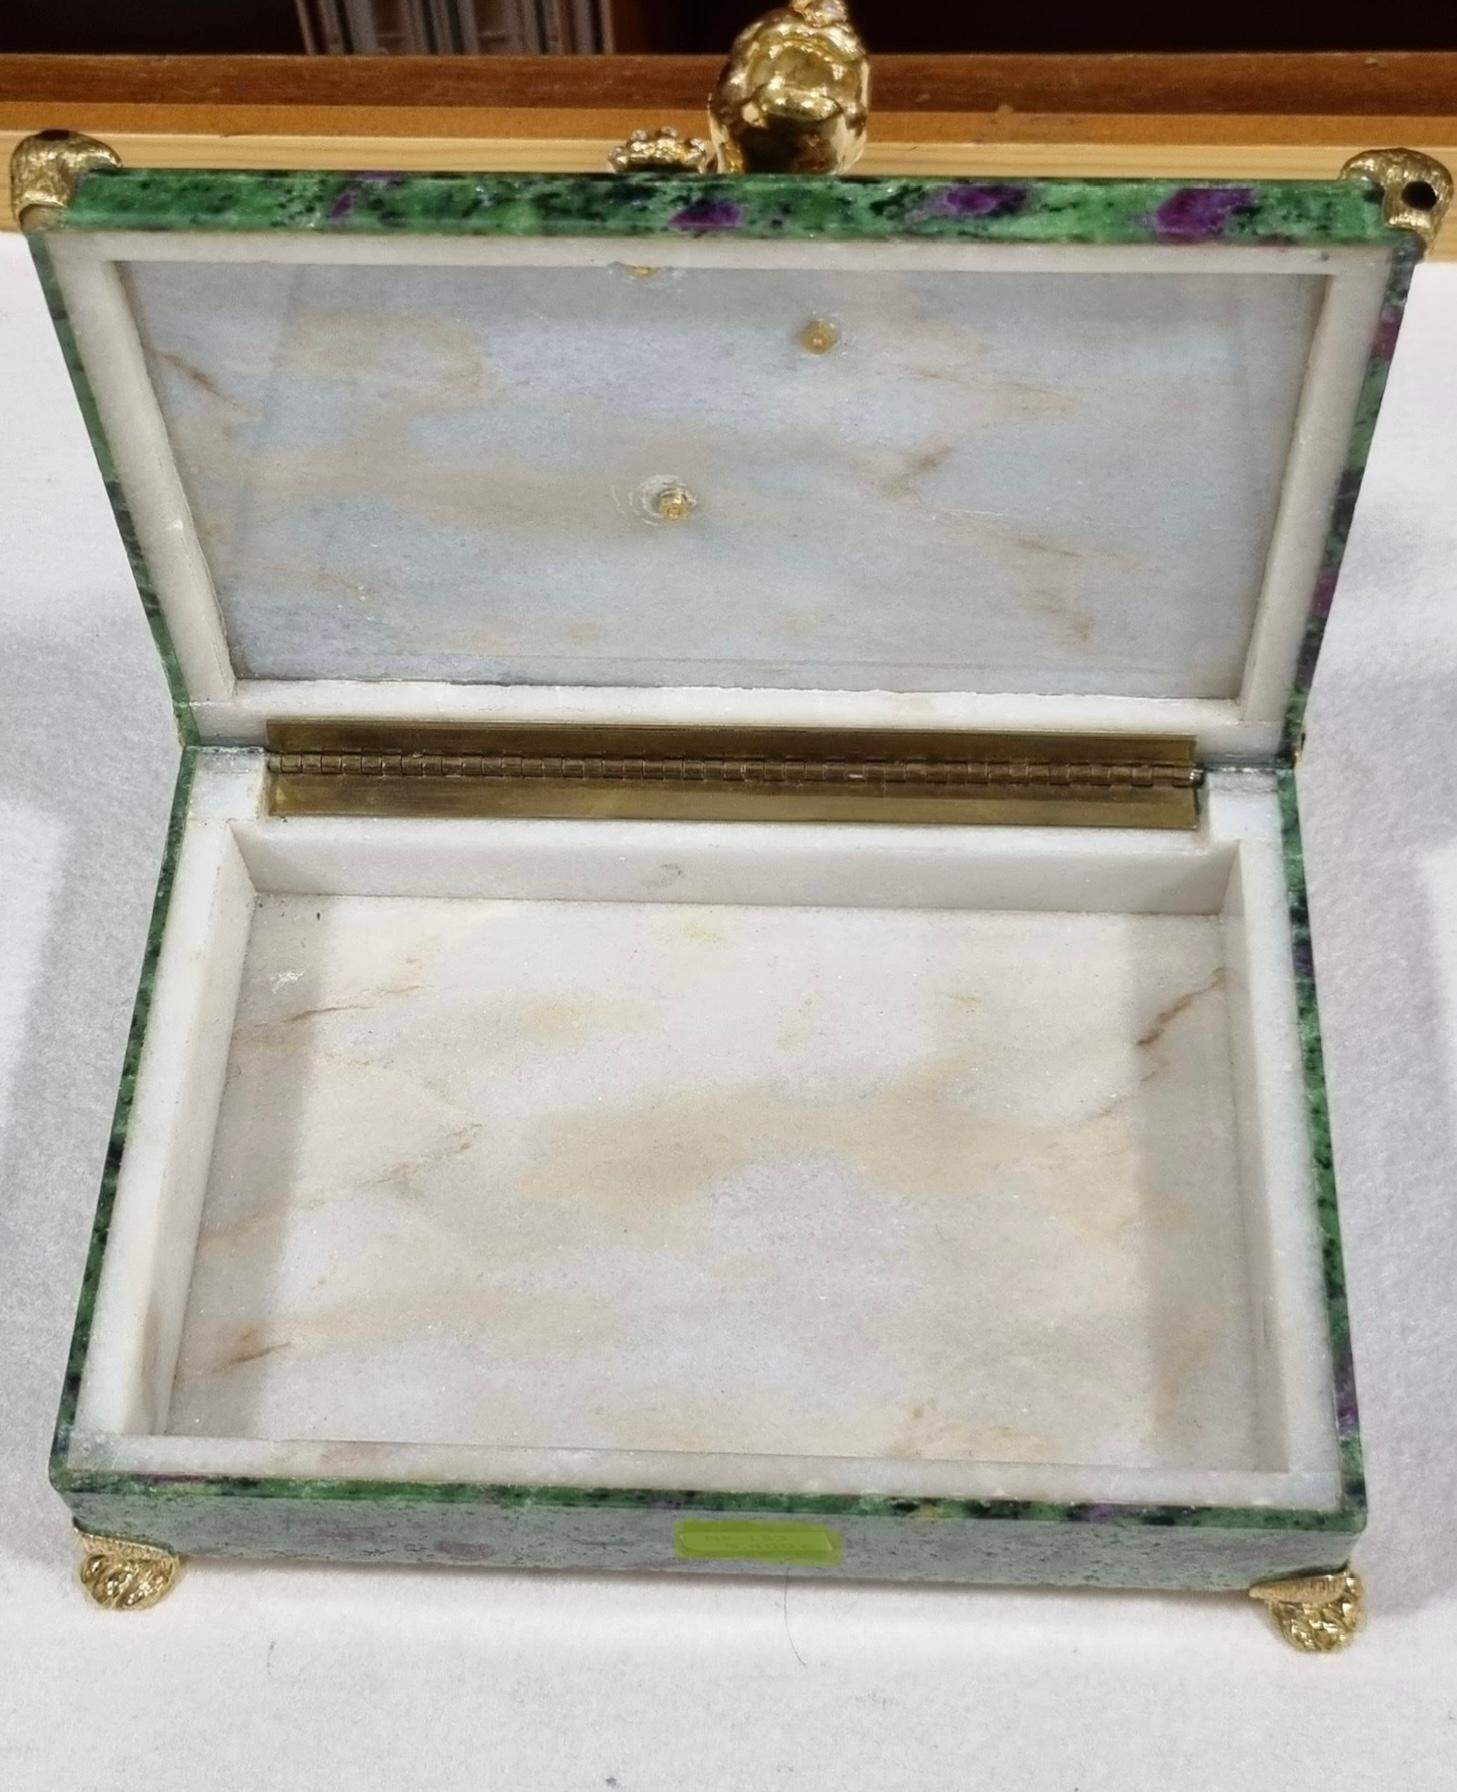 Gregory Gold & Onyx Panther in anyolite rubi jewelry box For Sale 1